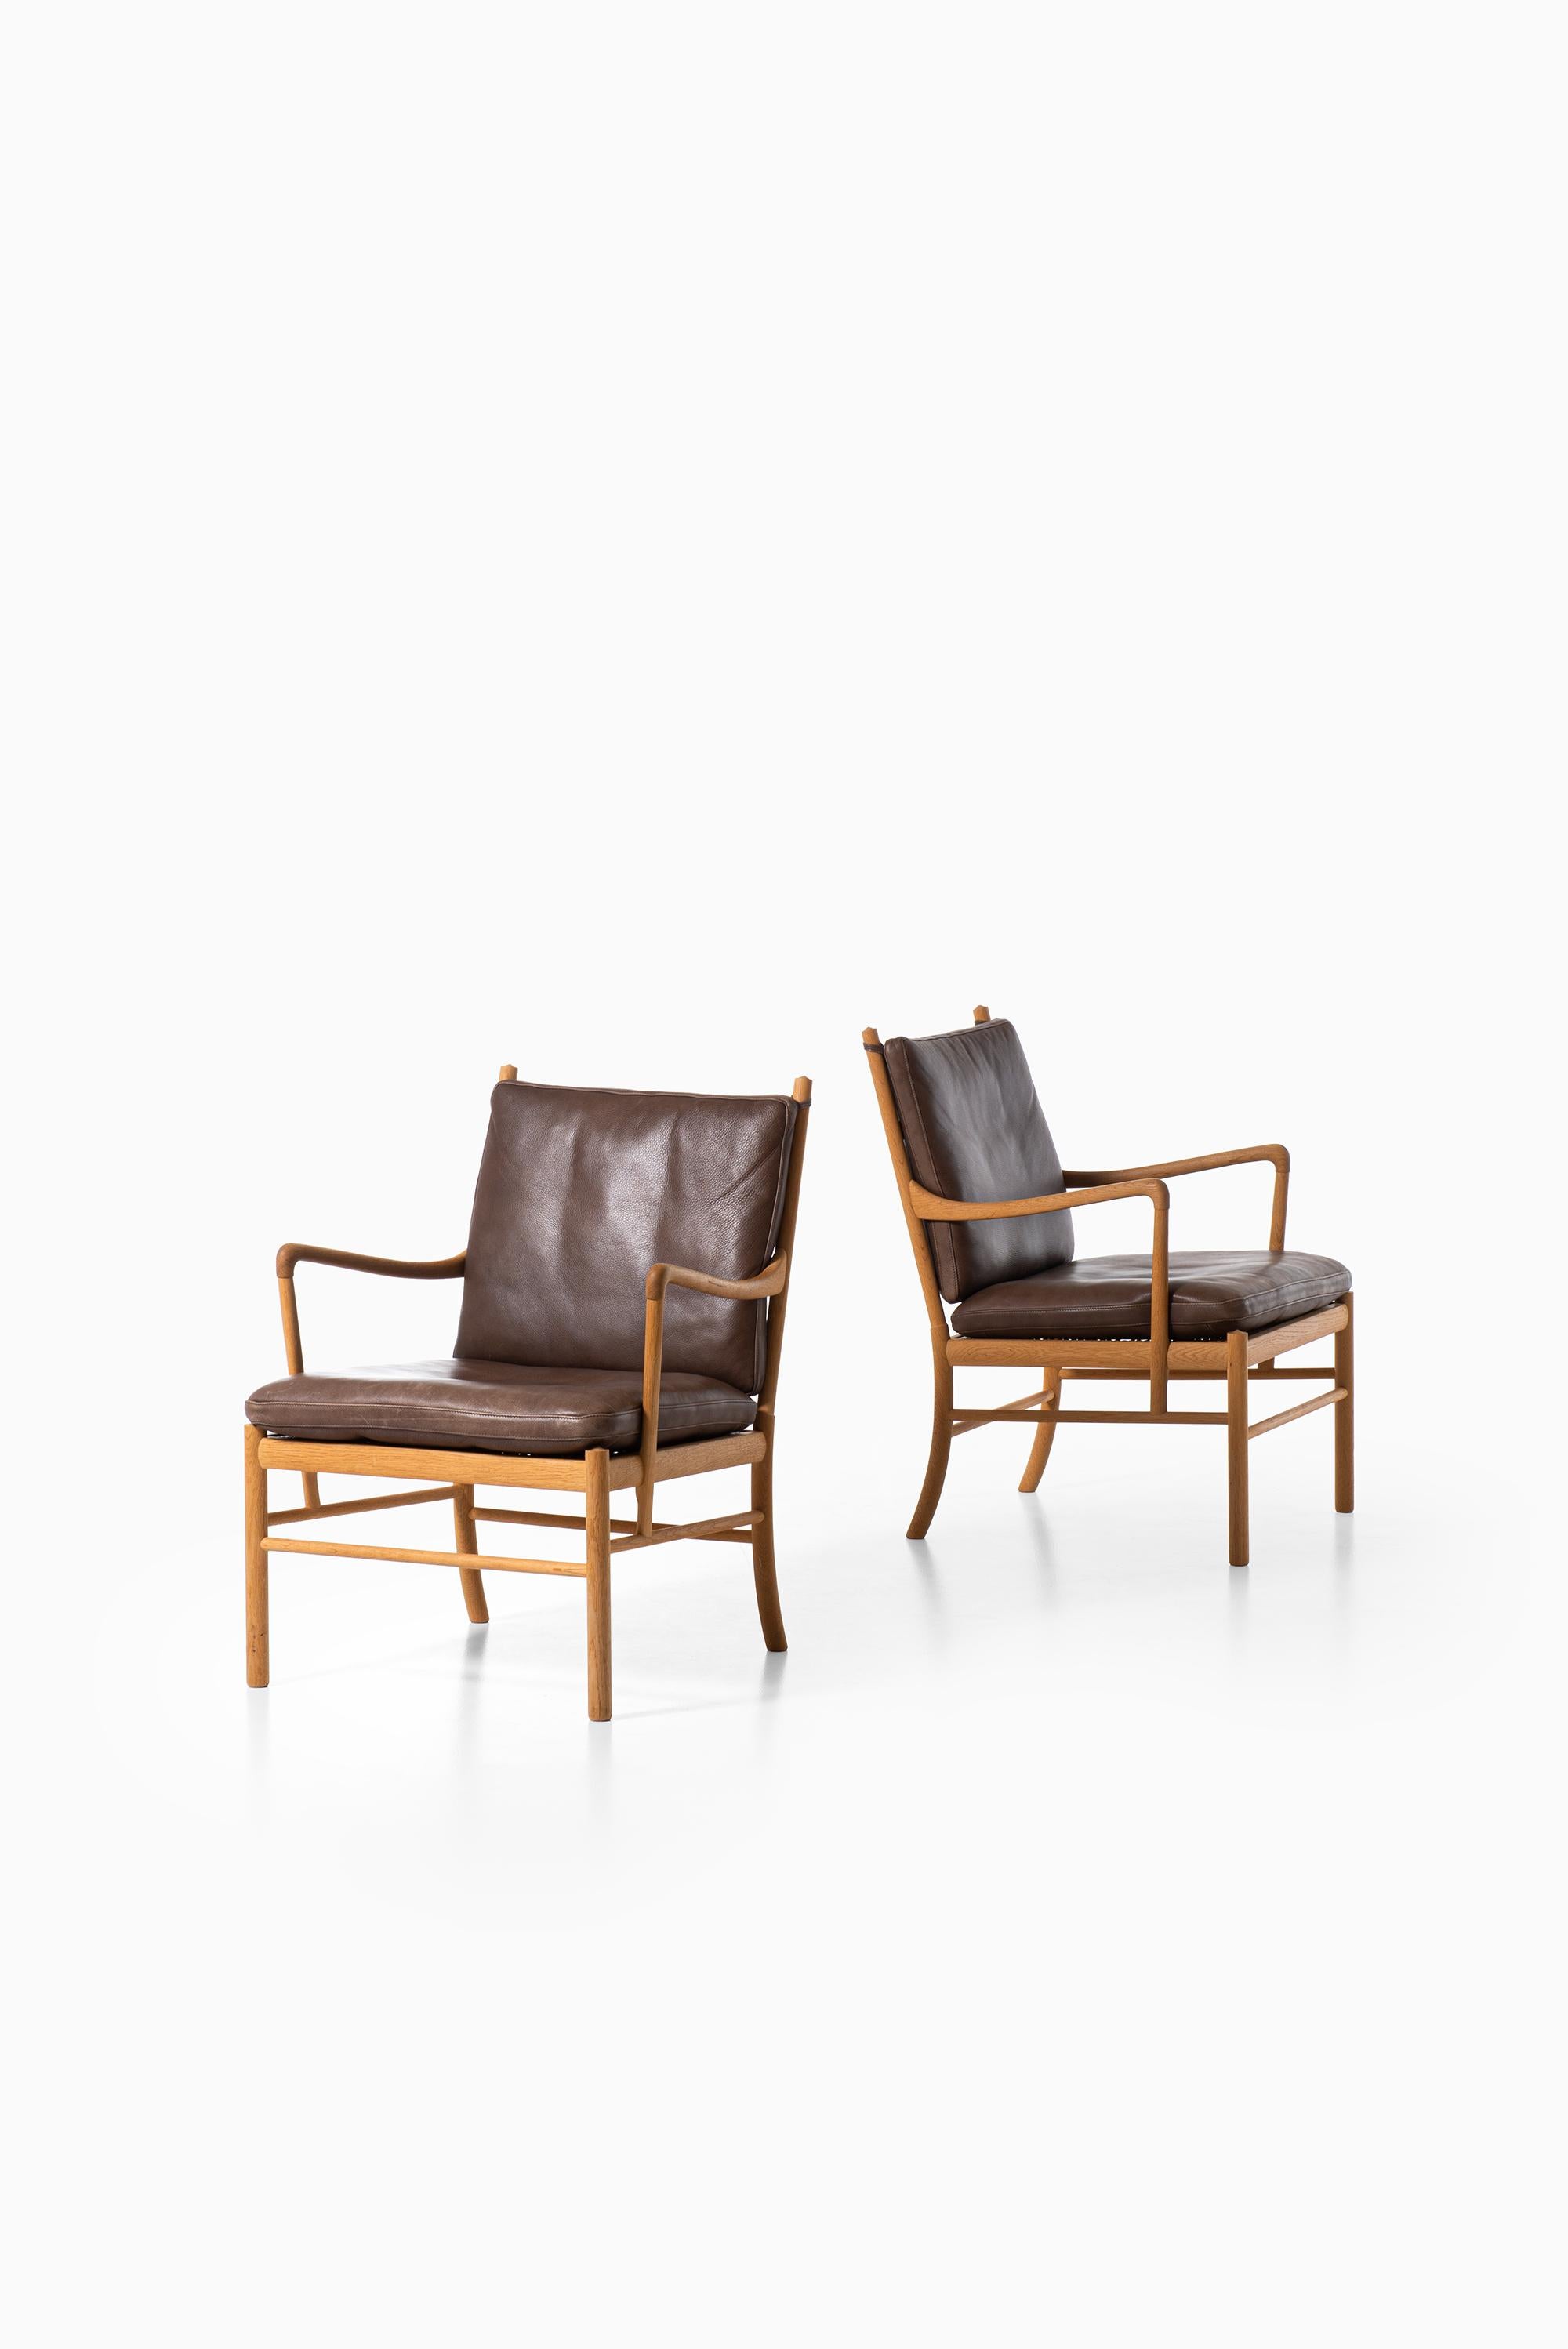 A pair of easy chairs model PJ-149 / colonial designed by Ole Wanscher. Produced by P. Jeppesen møbelfabrik in Denmark.